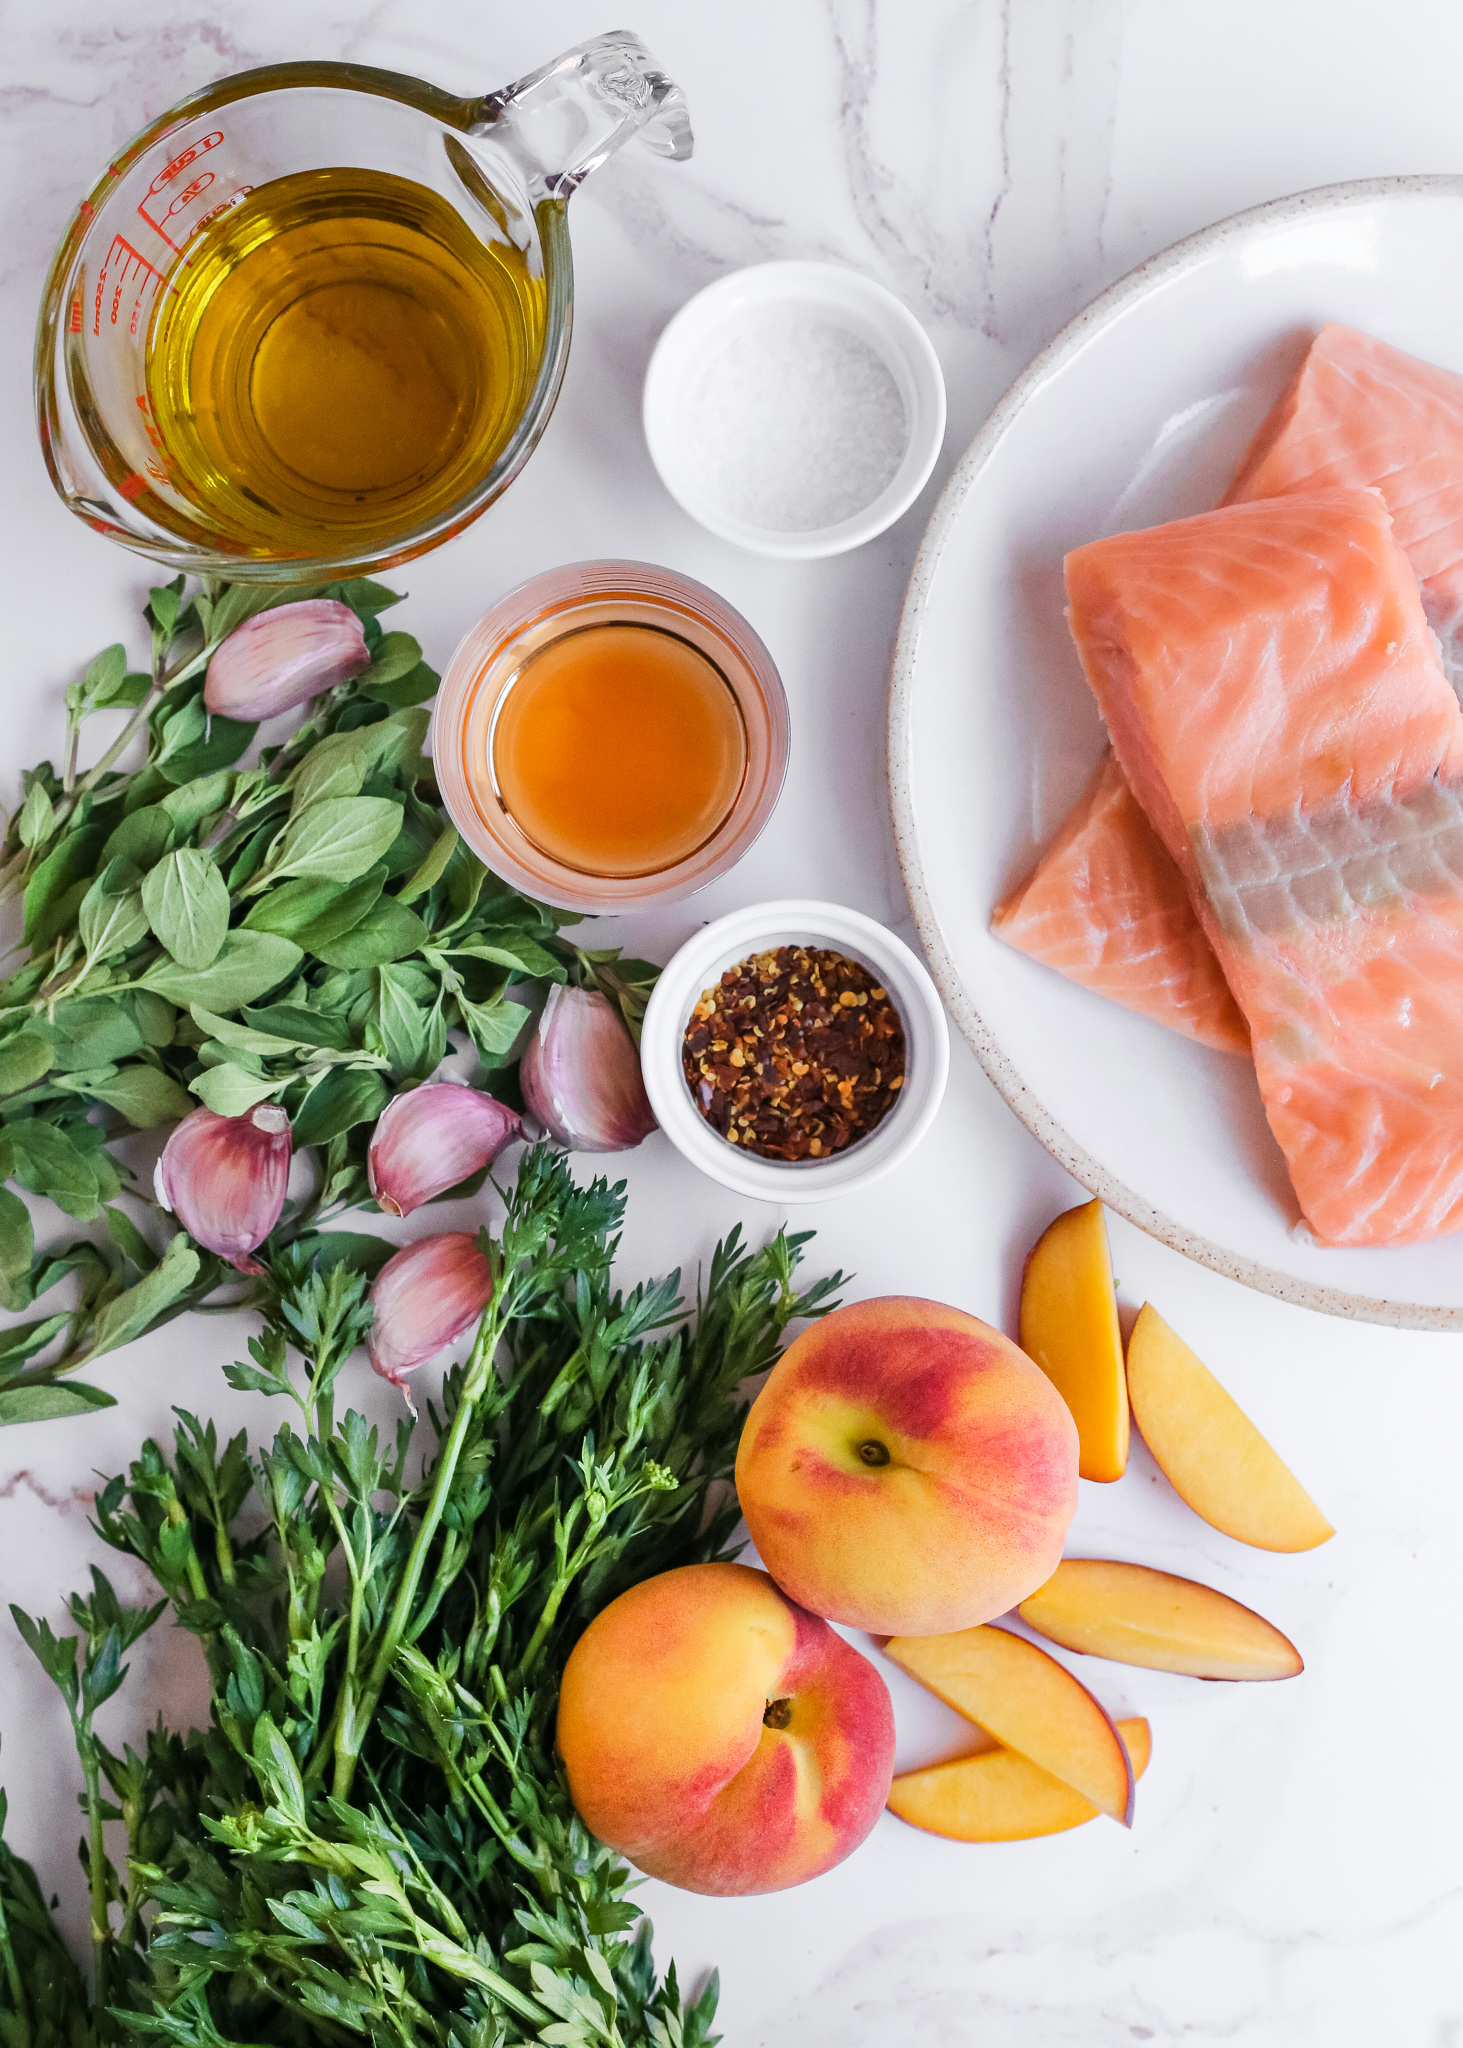 A collection of ingredients for a summer salmon salad recipe, including salmon fillets, parsley, oregano, garlic, peaches, olive oil, red wine vinegar, and salt